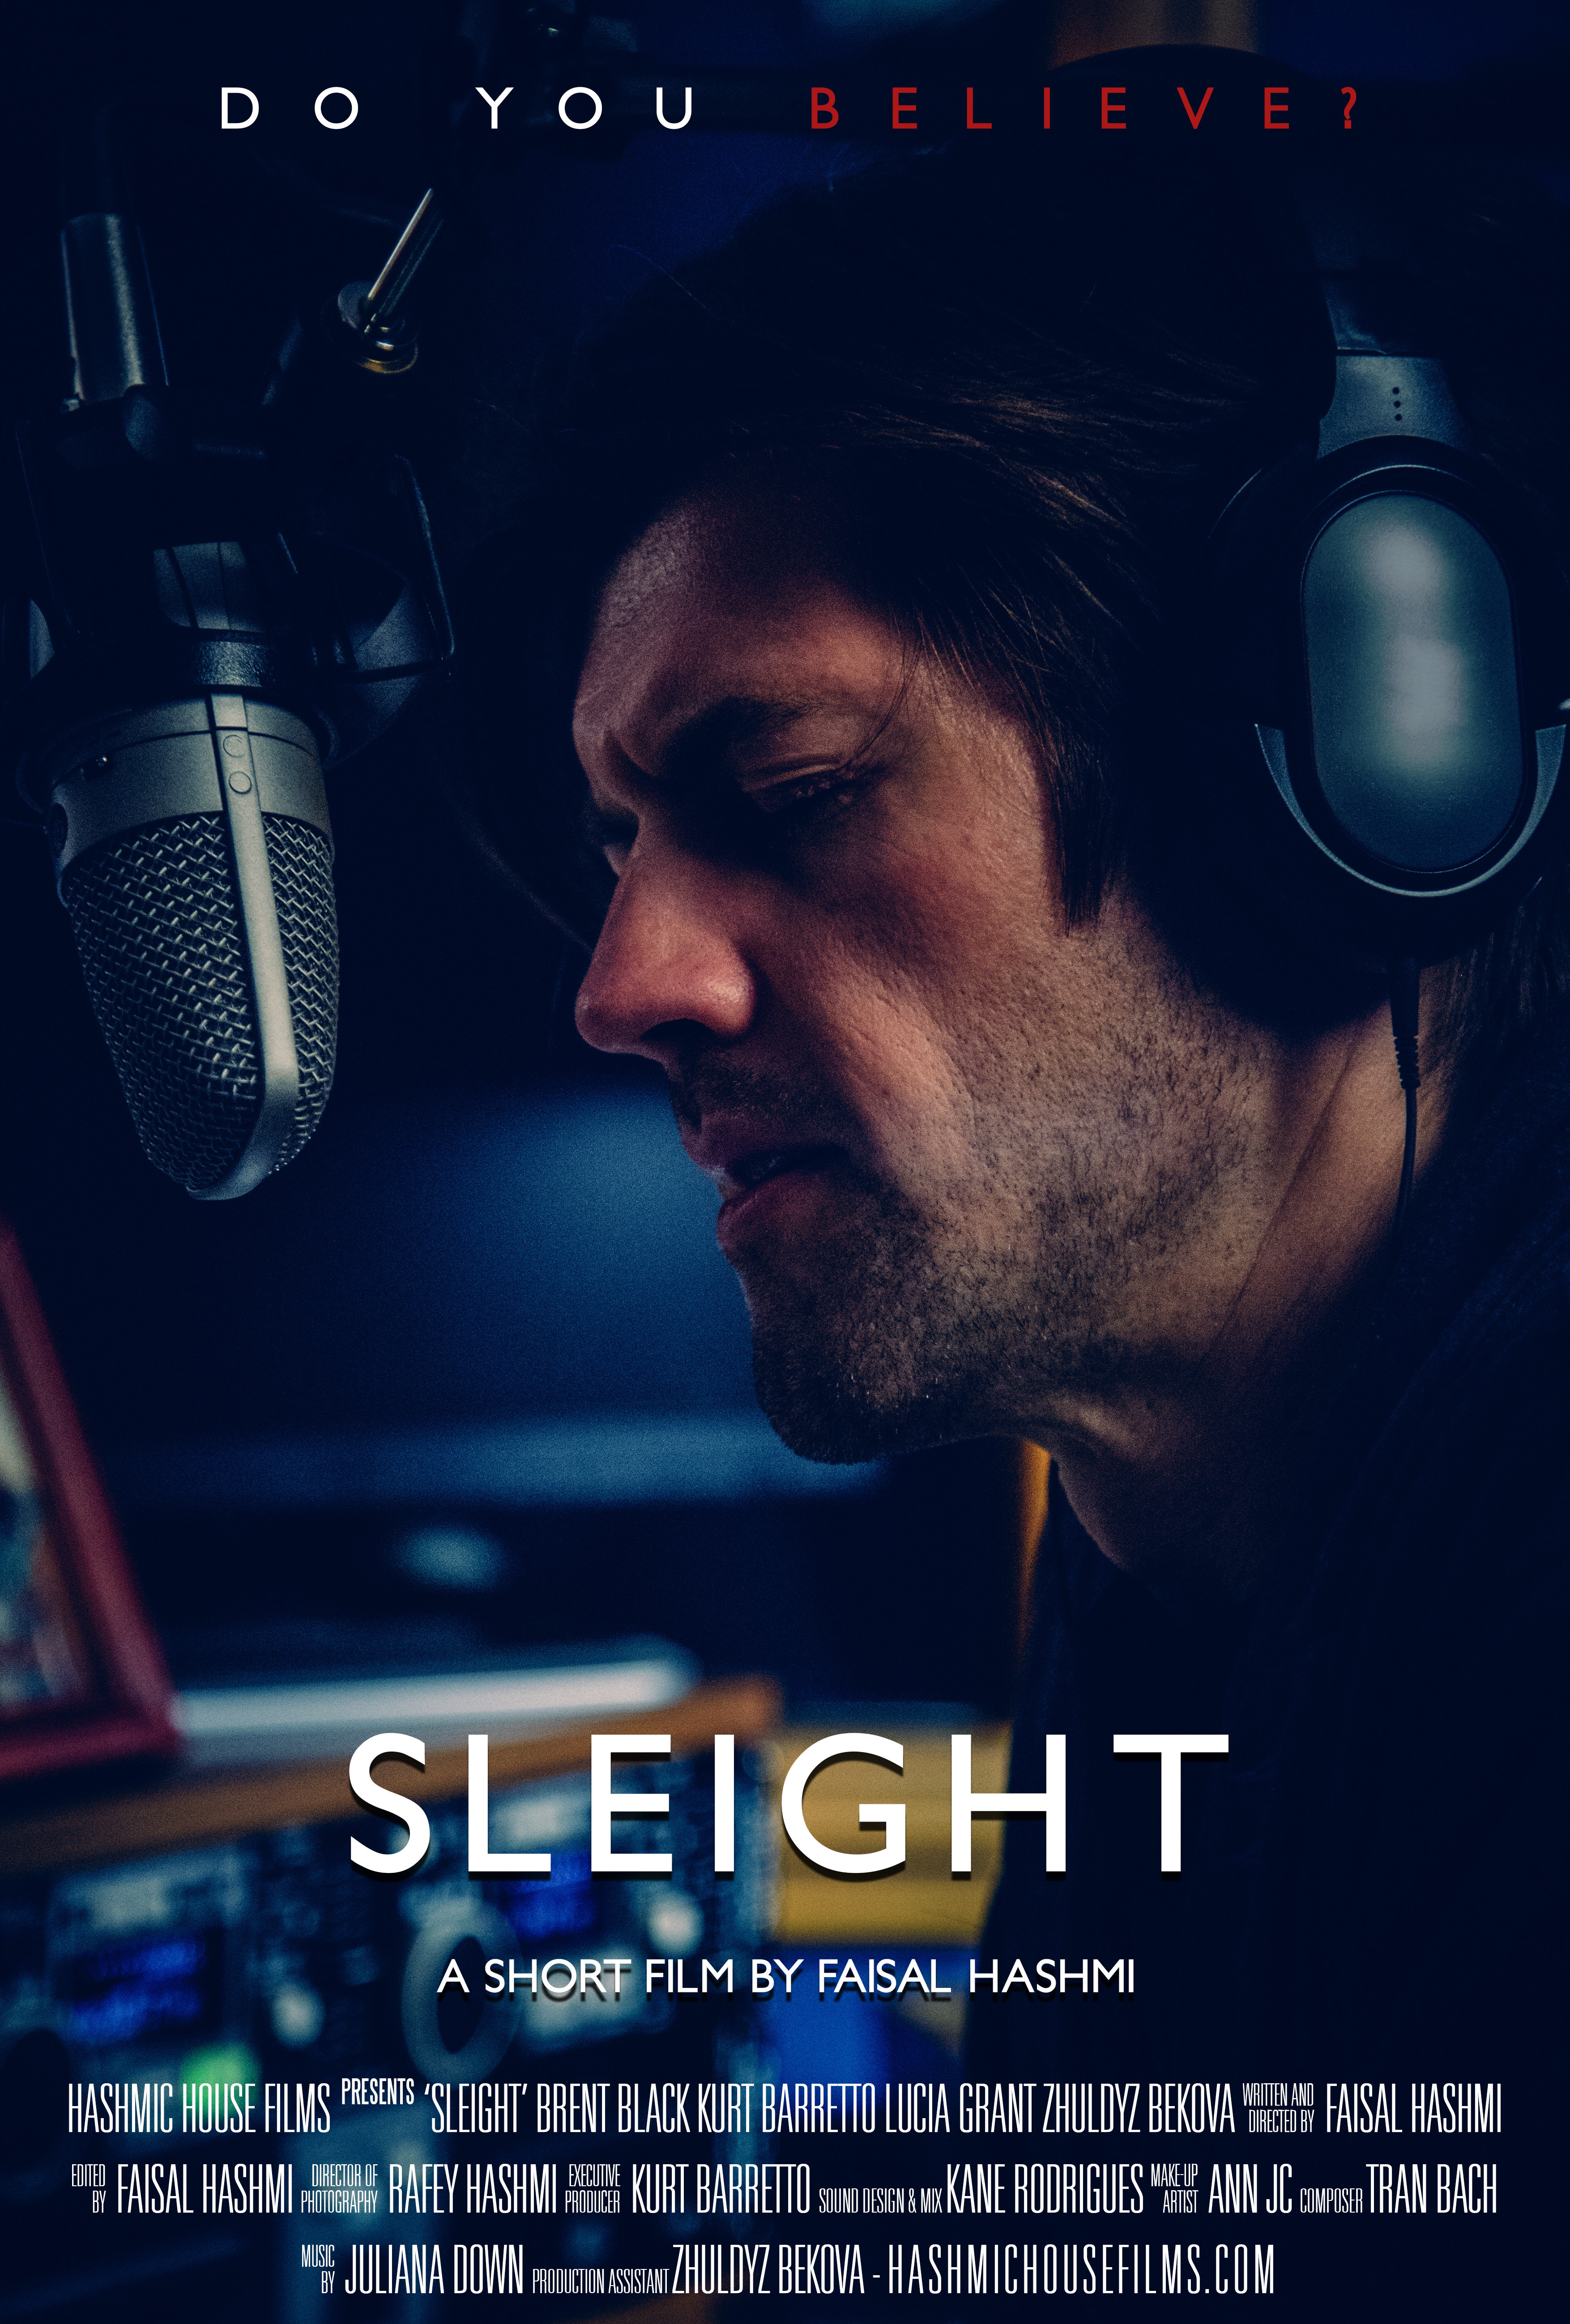 Poster for the short film Sleight, directed by Faisal Hashmi.